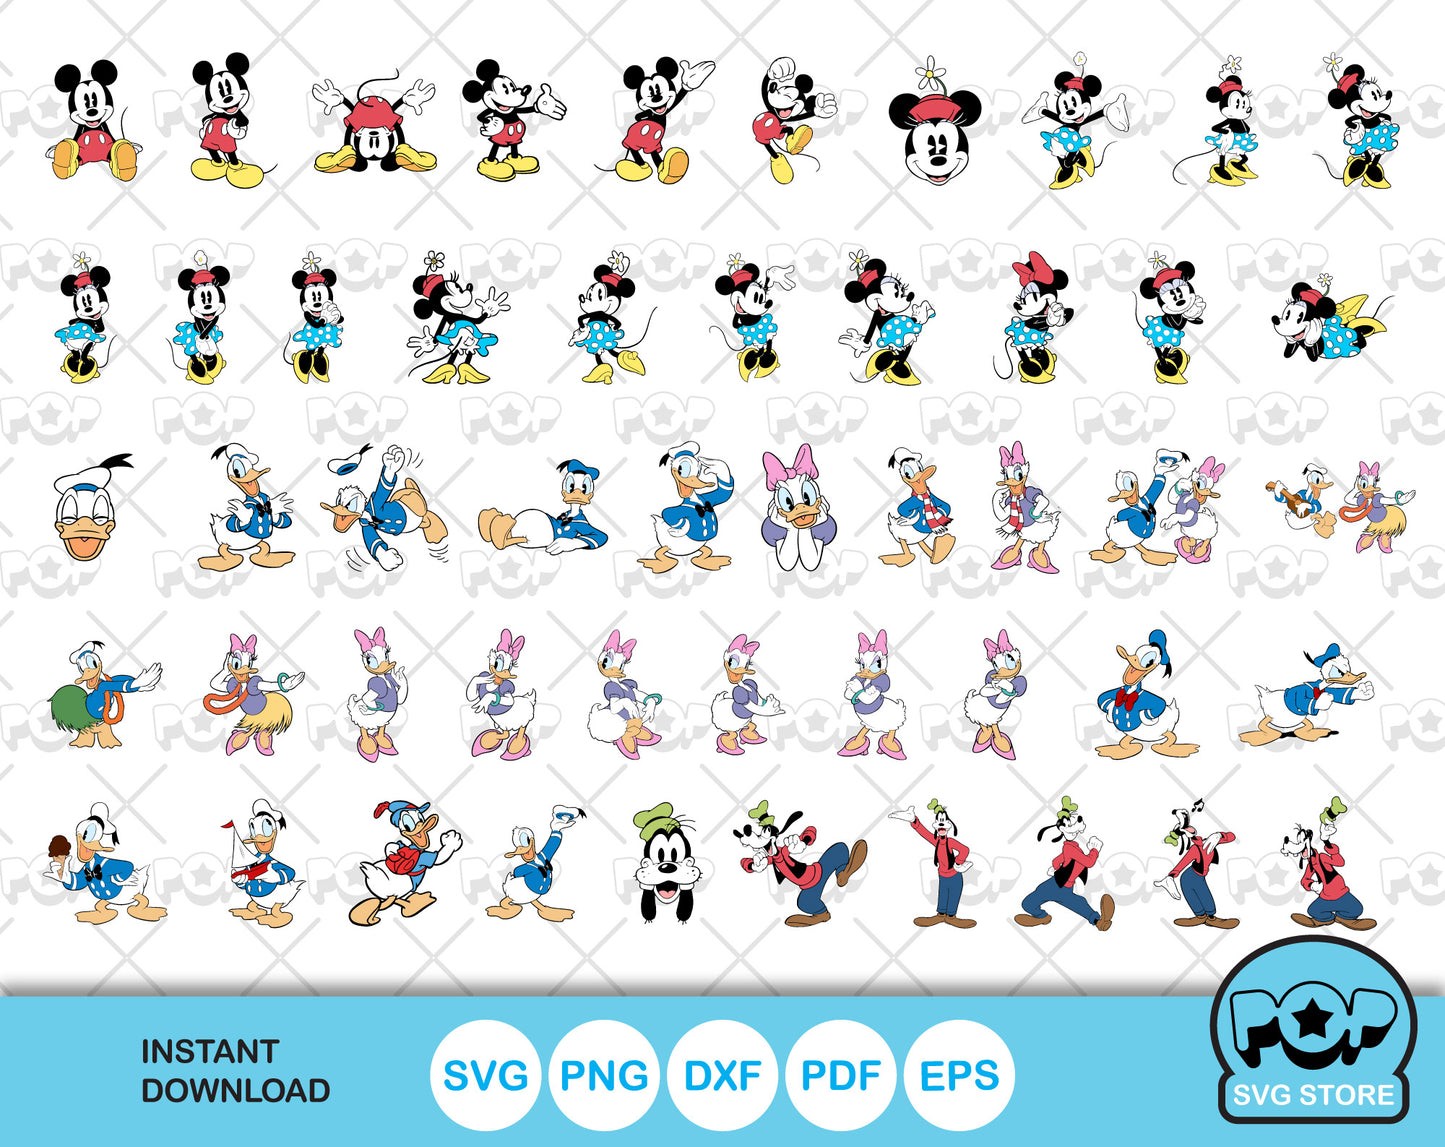 Classic Mickey and Friends BIG BUNDLE 500 files, svg cut files for Cricut / Silhouette, Mickey & friends png